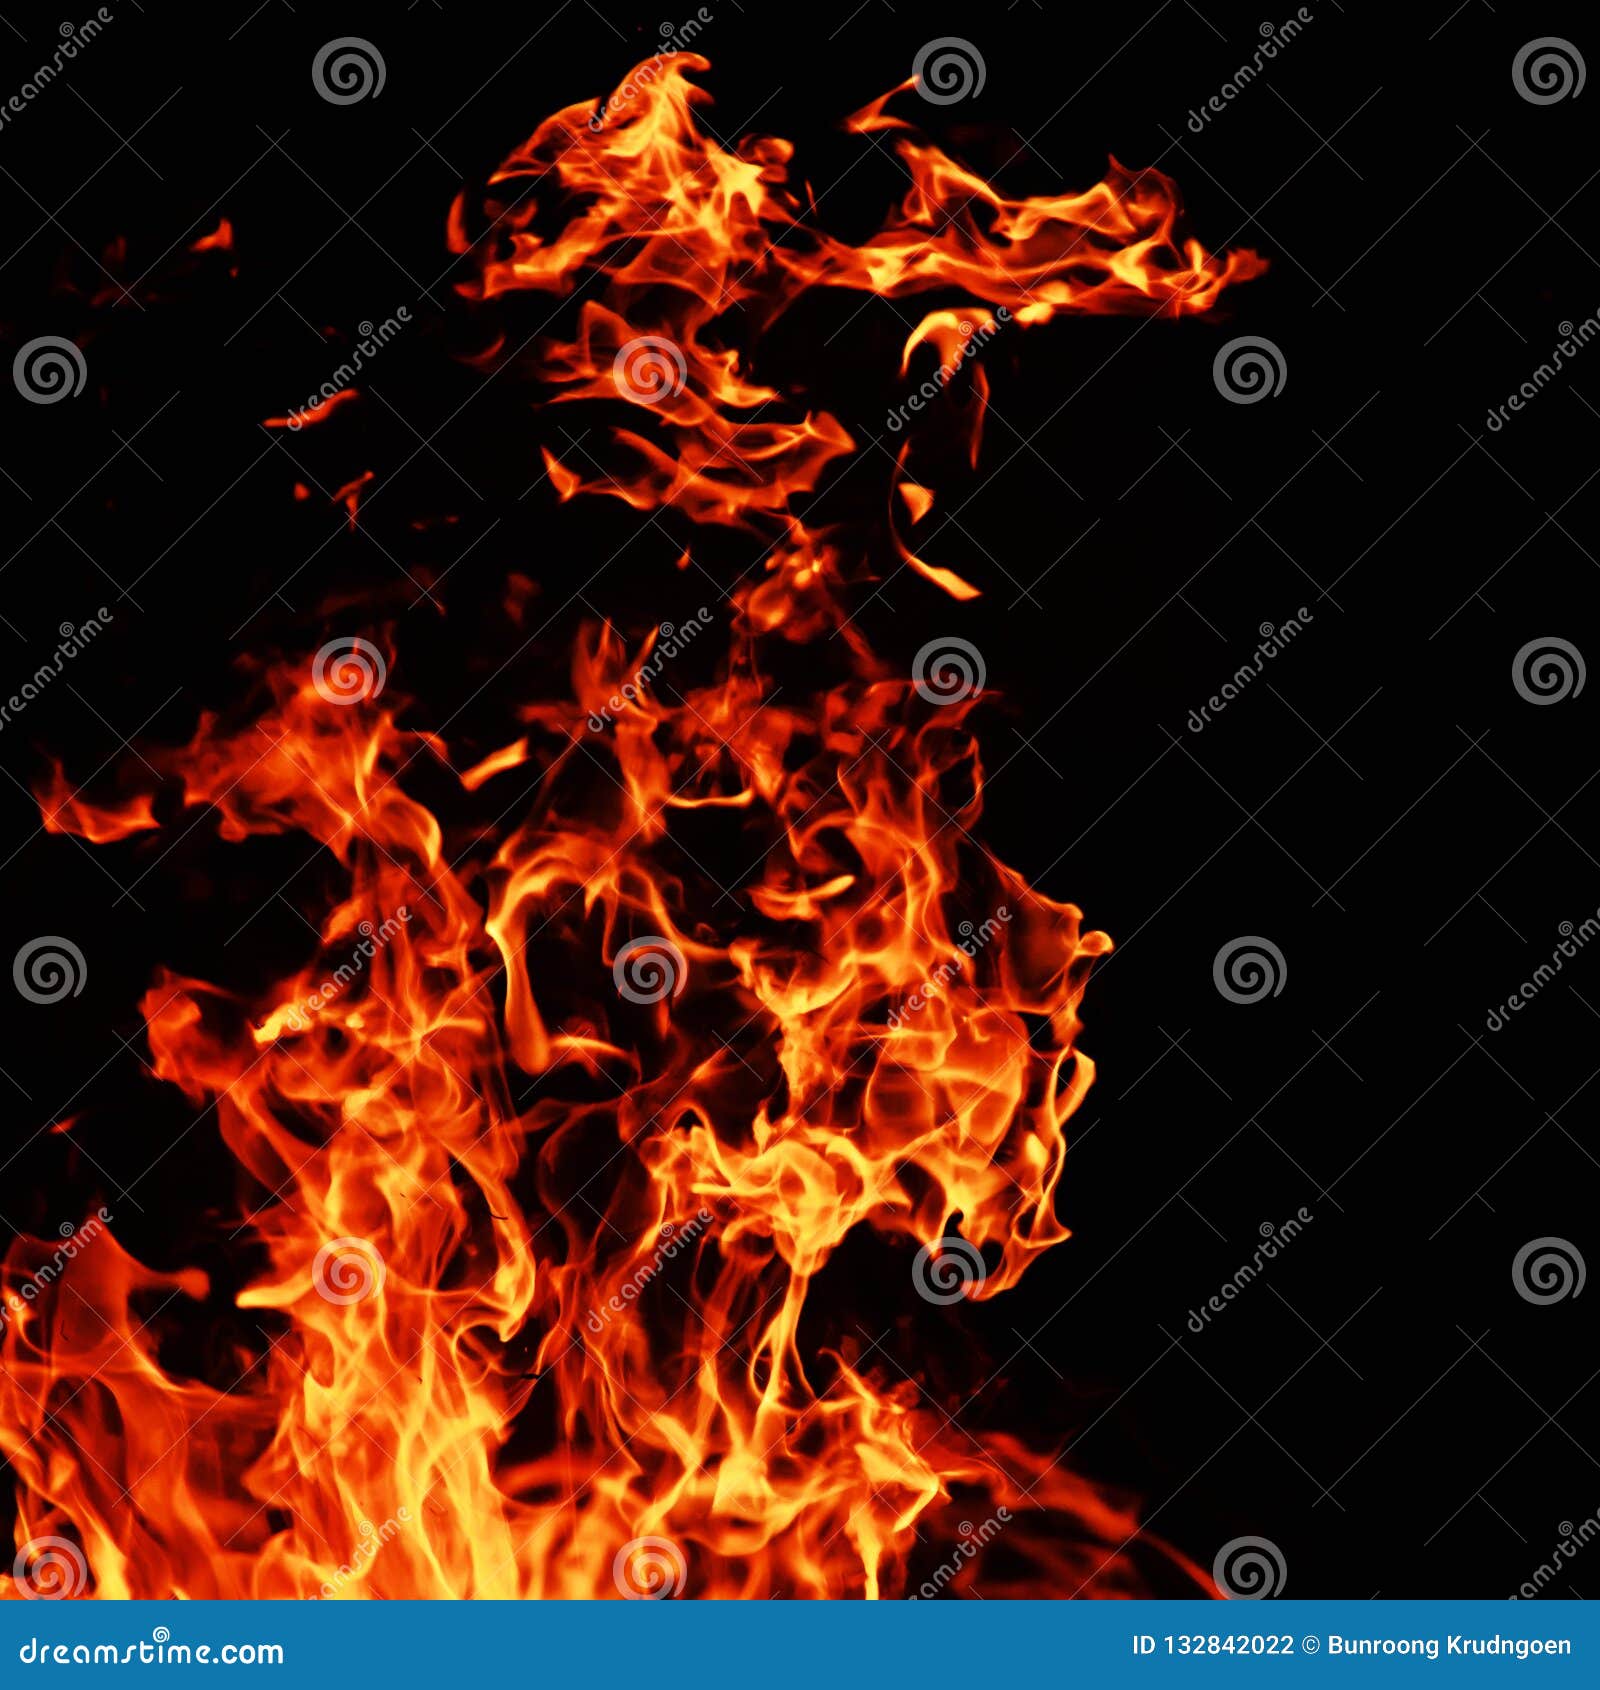 Fire on black background stock photo. Image of closeup - 132842022